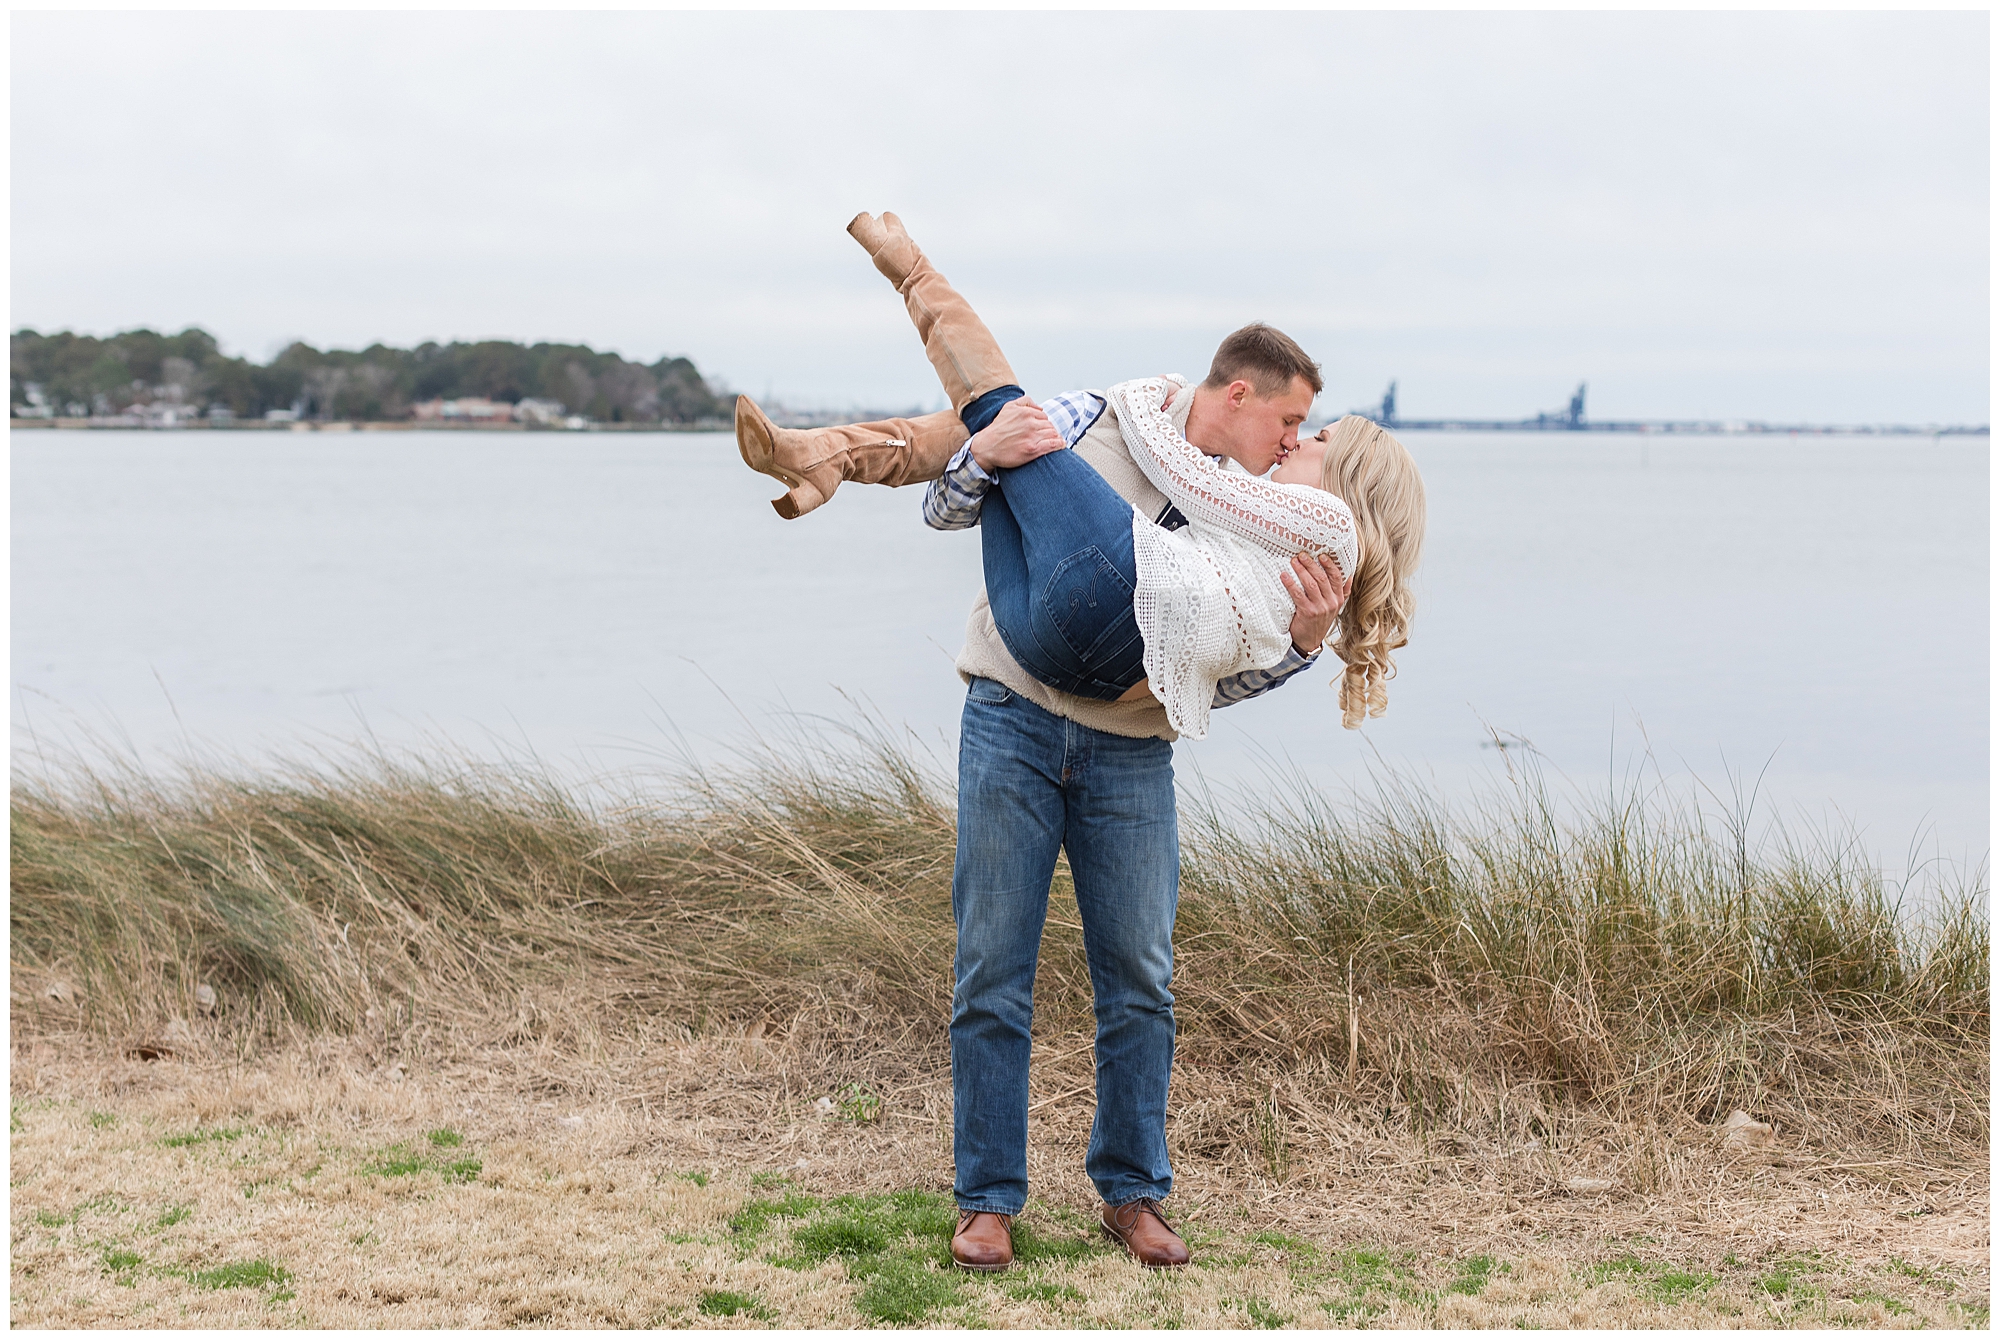 Hermitage Museum & Gardens Engagement Session